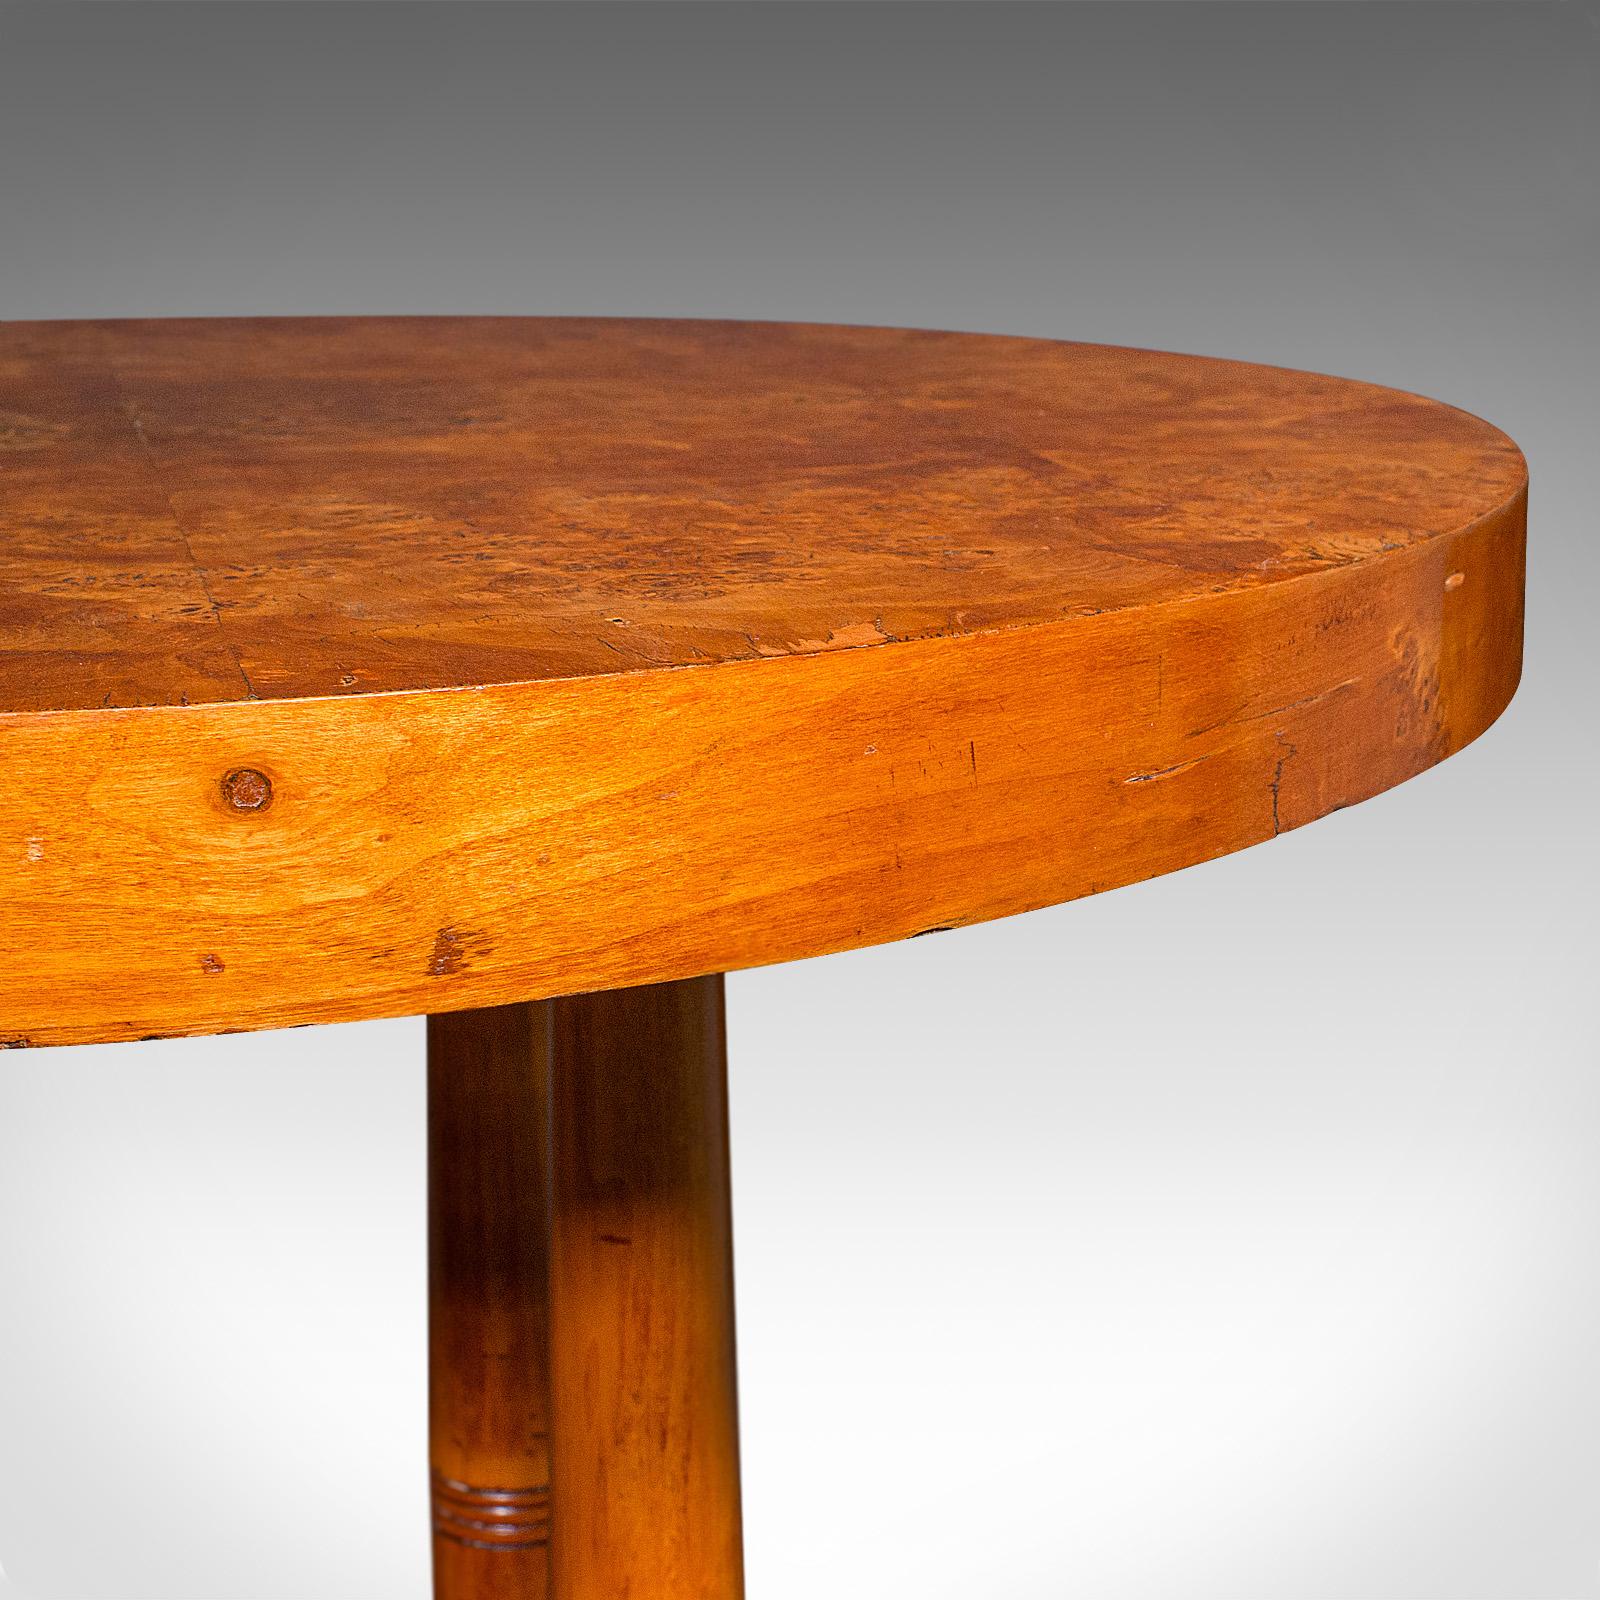 Vintage Podium Hall Table, French, Birds Eye Maple, Lamp, Side, Art Deco, C.1930 For Sale 4